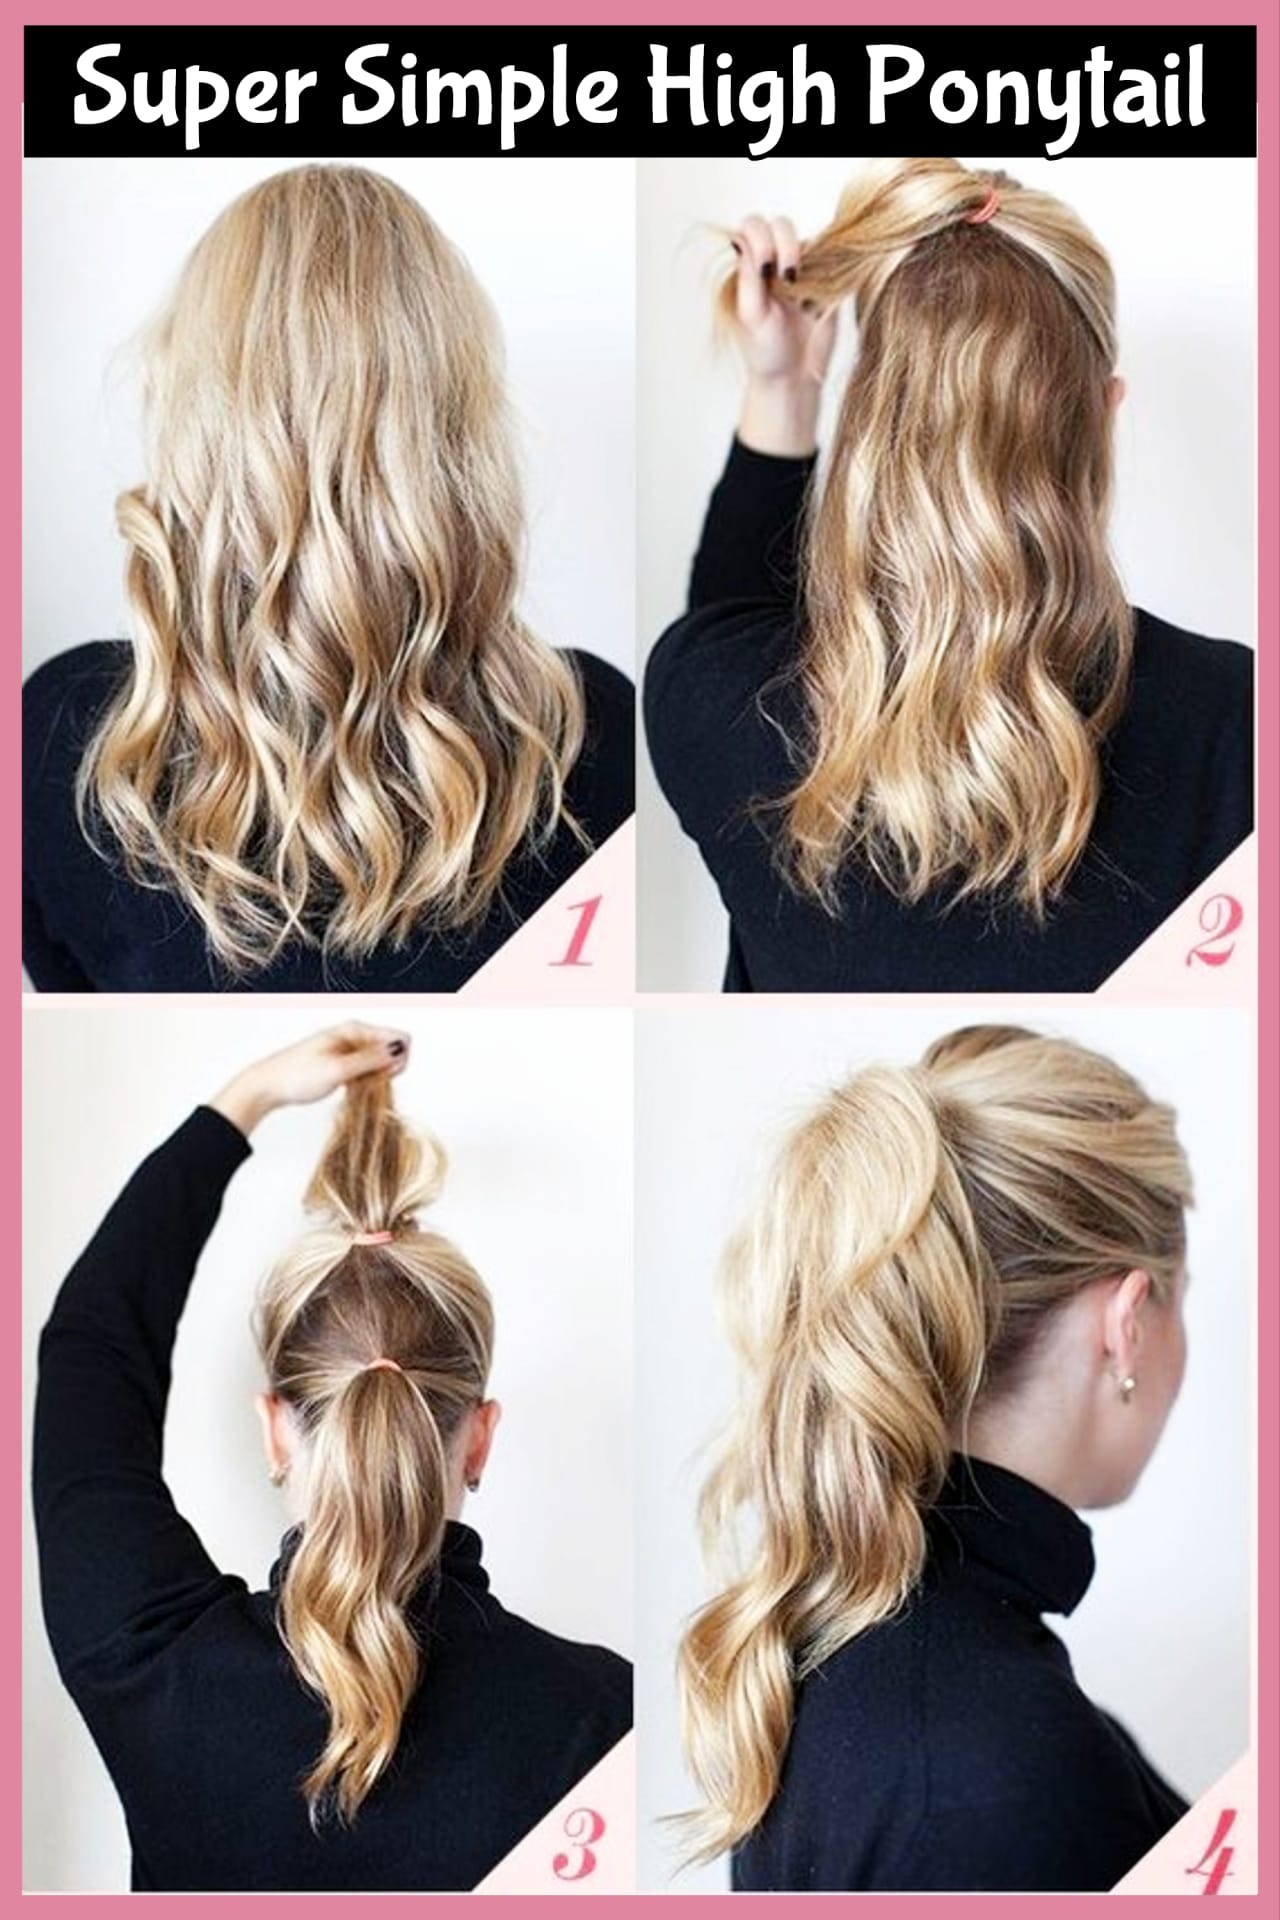 Lazy hairstyles - super simple high poofy ponytail hairstyle tutorials